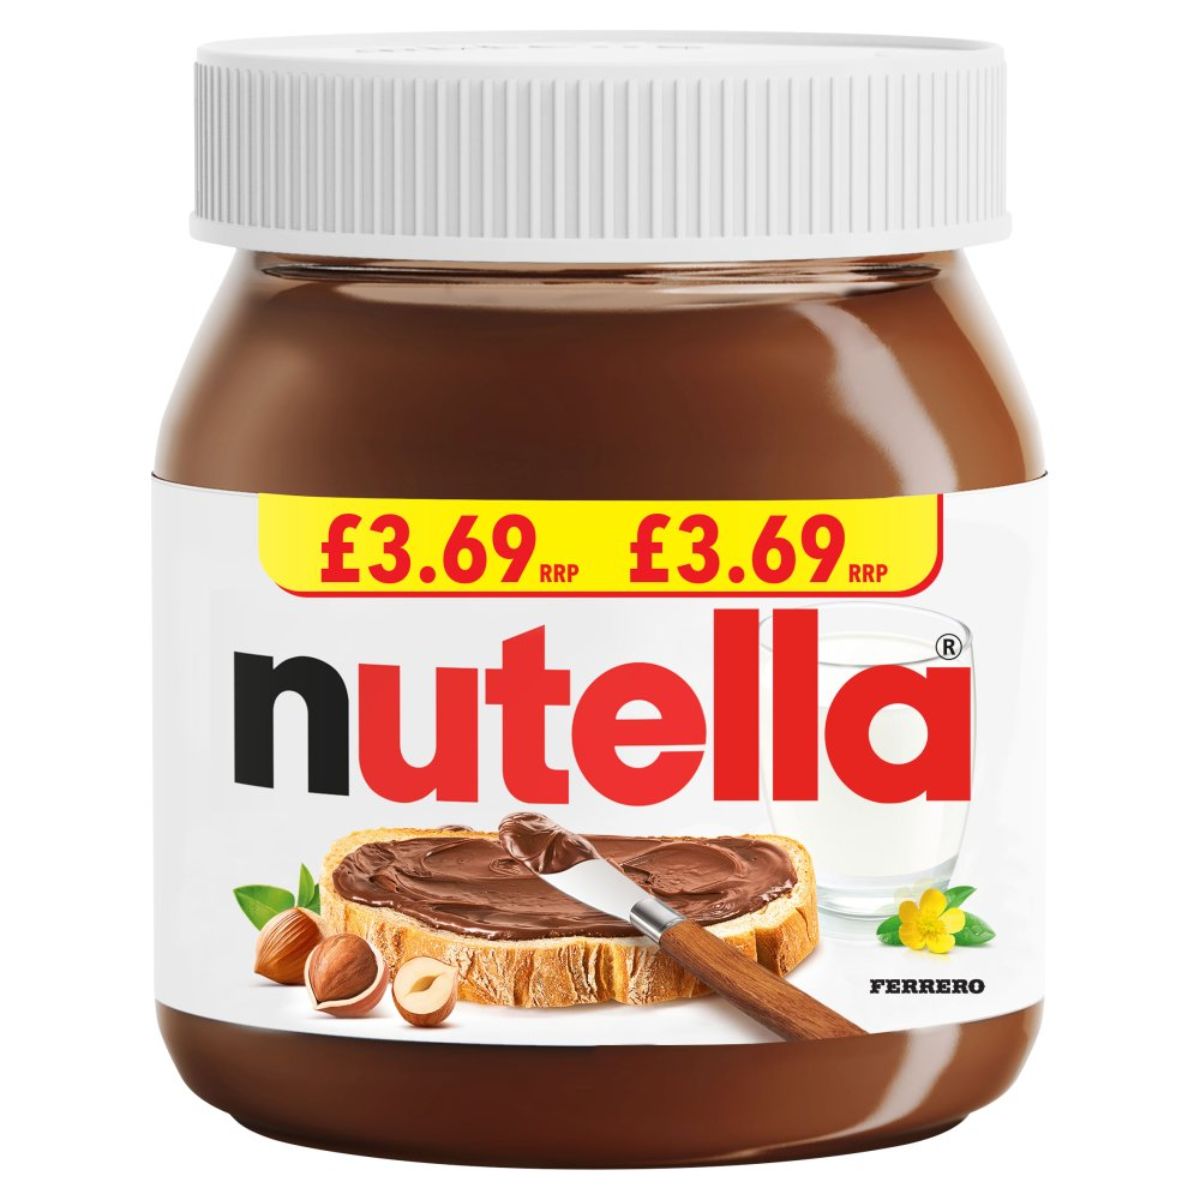 A jar of Nutella - Hazelnut Spread - 350g with a price label, depicting chocolate spread on bread with hazelnuts and a flower beside it.